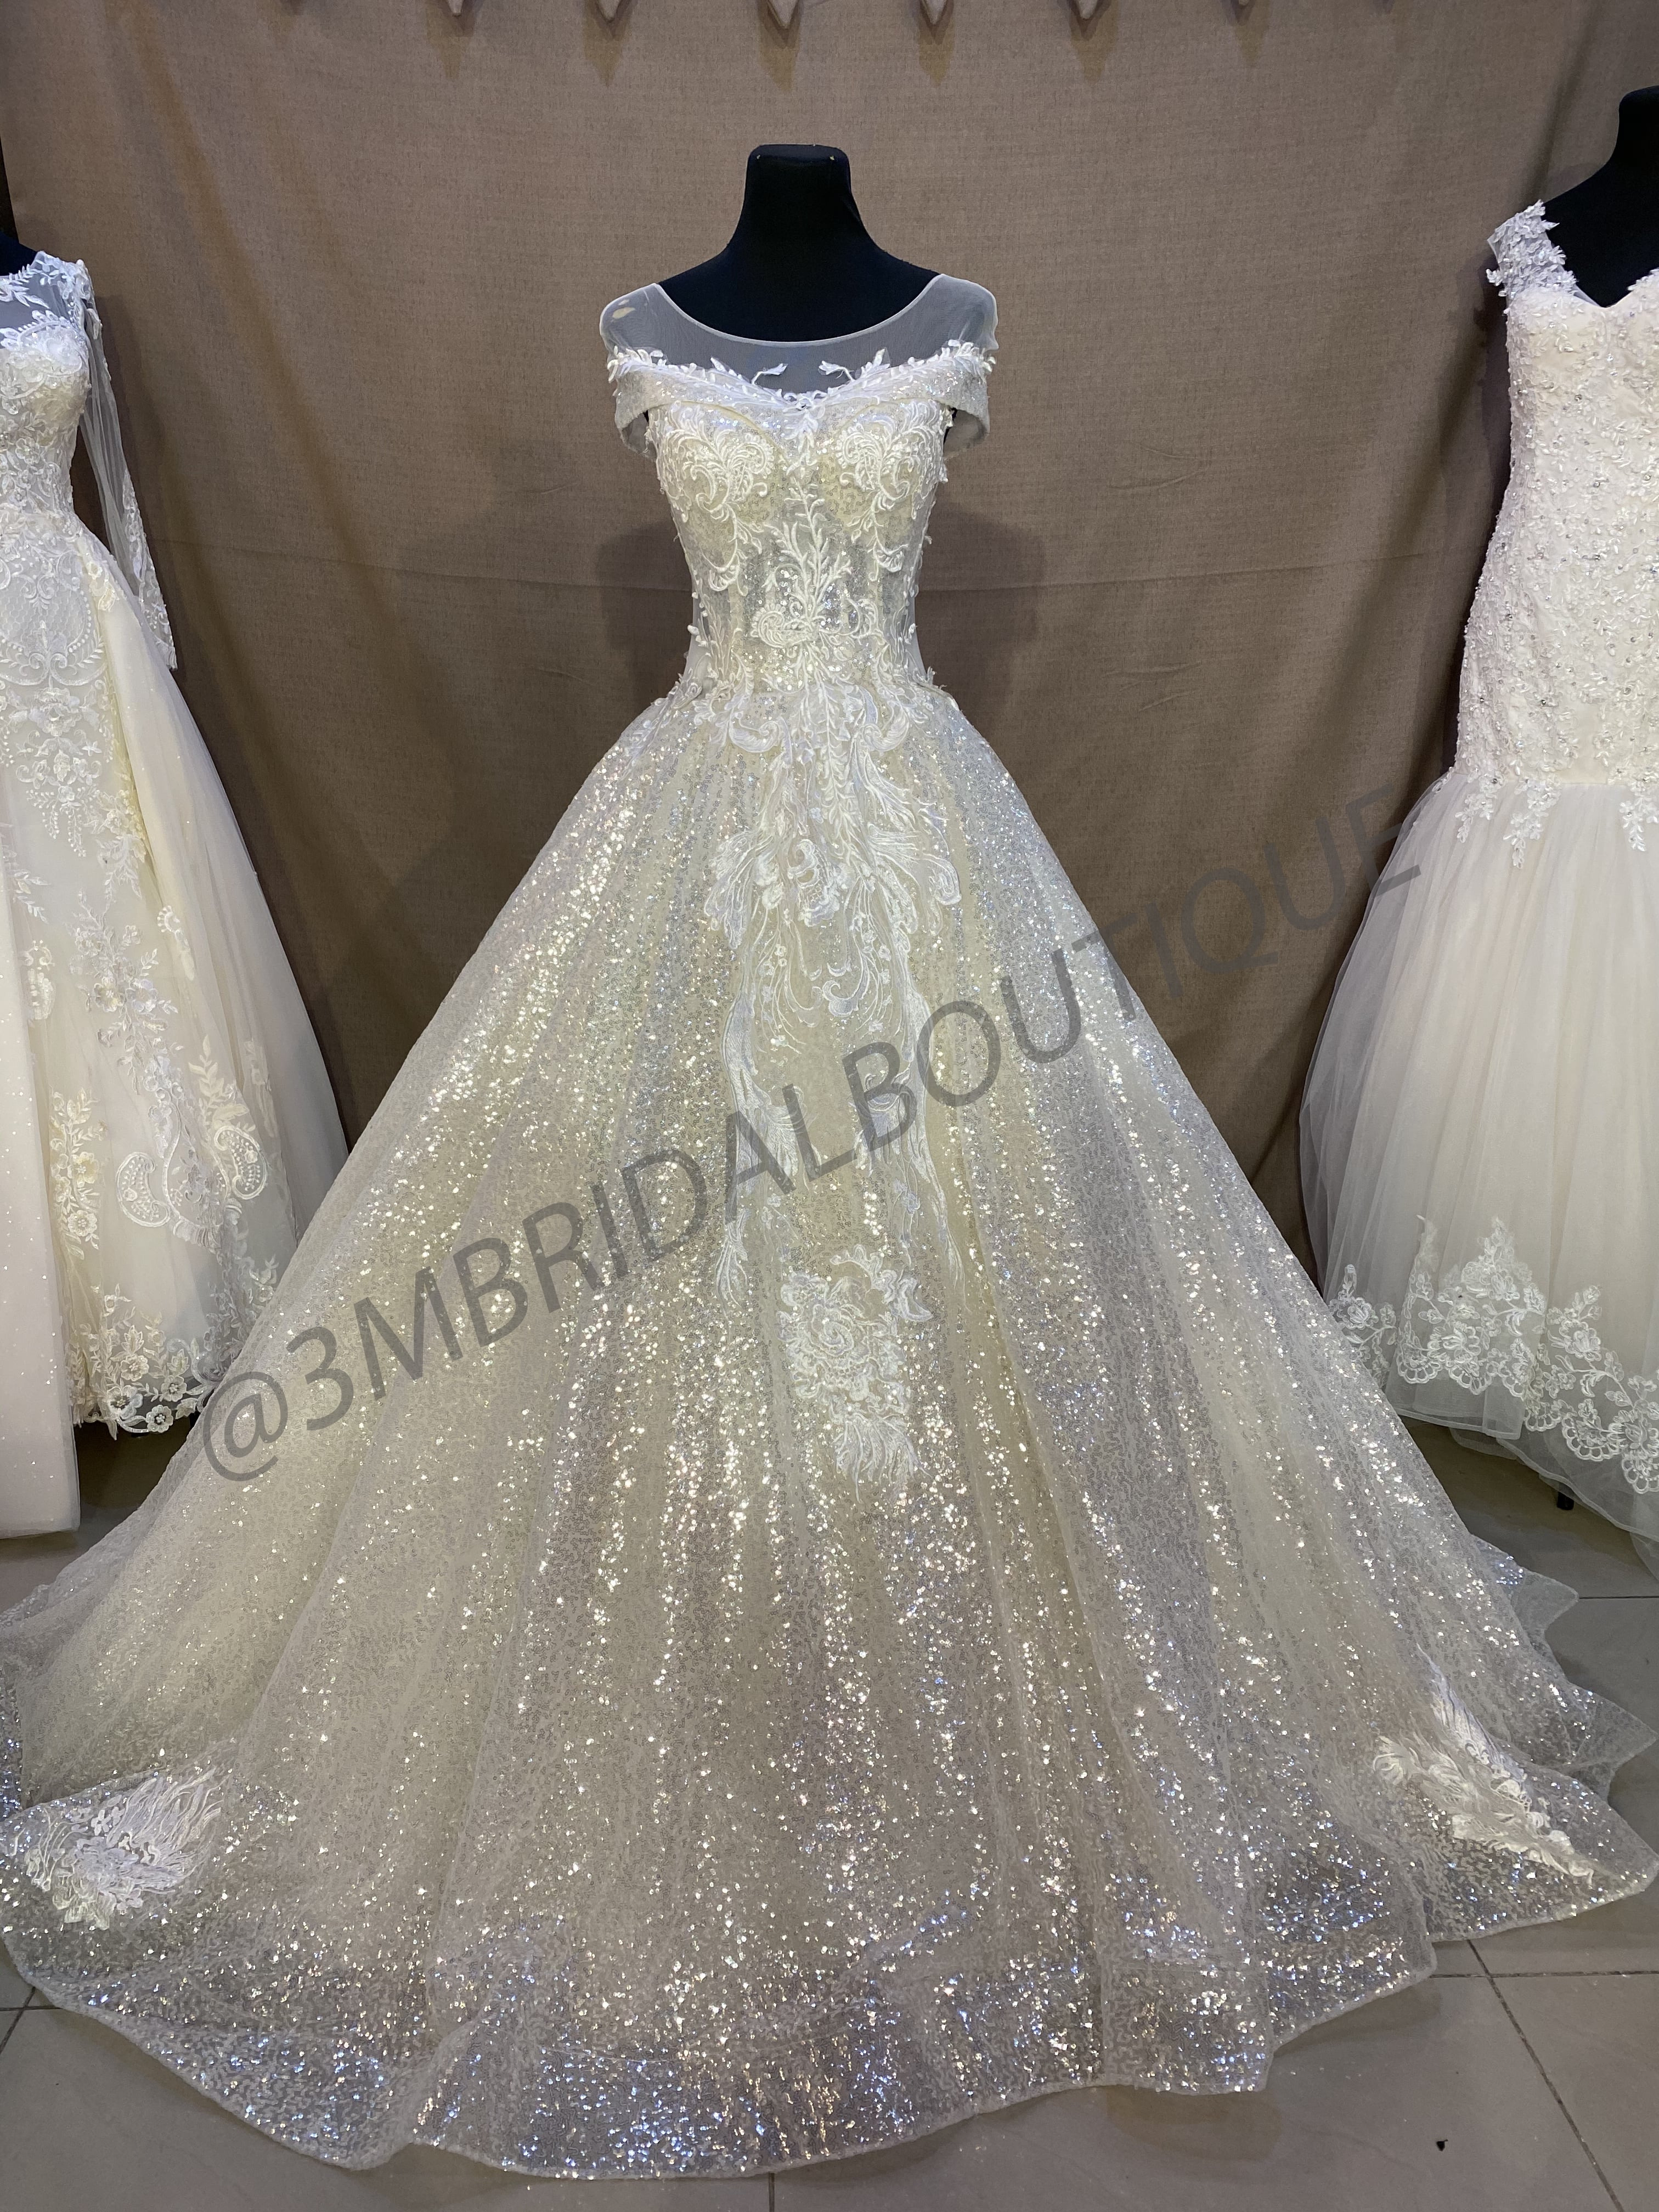 sparkling long gown